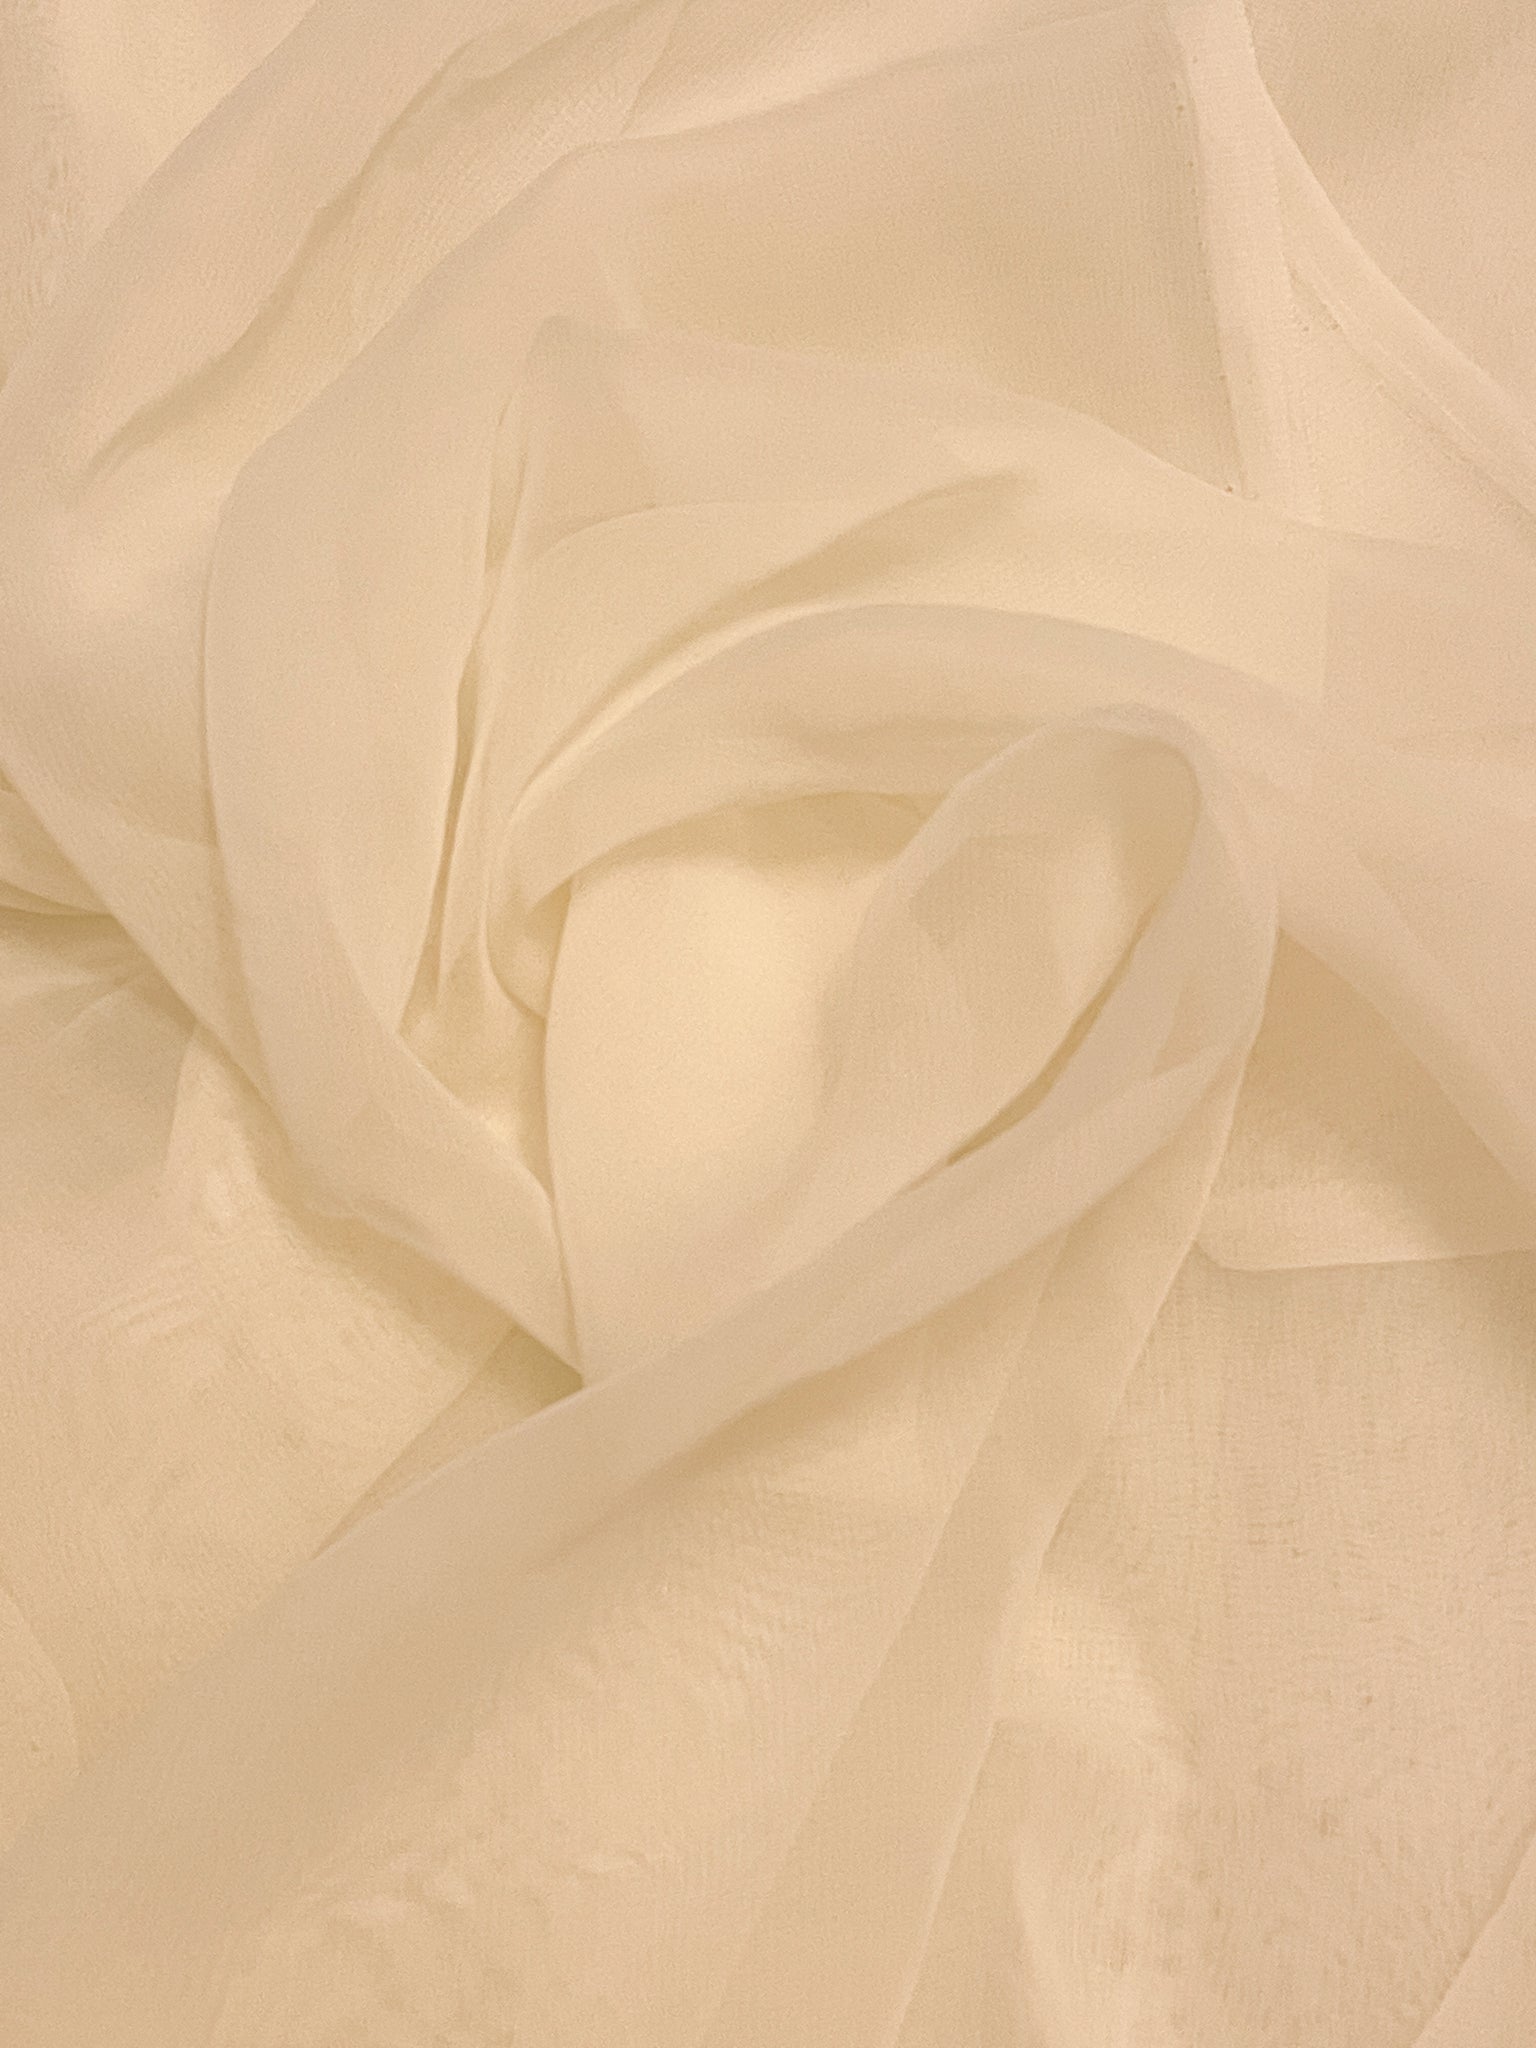 SALE 3 YD Polyester Chiffon Salvaged - Off White